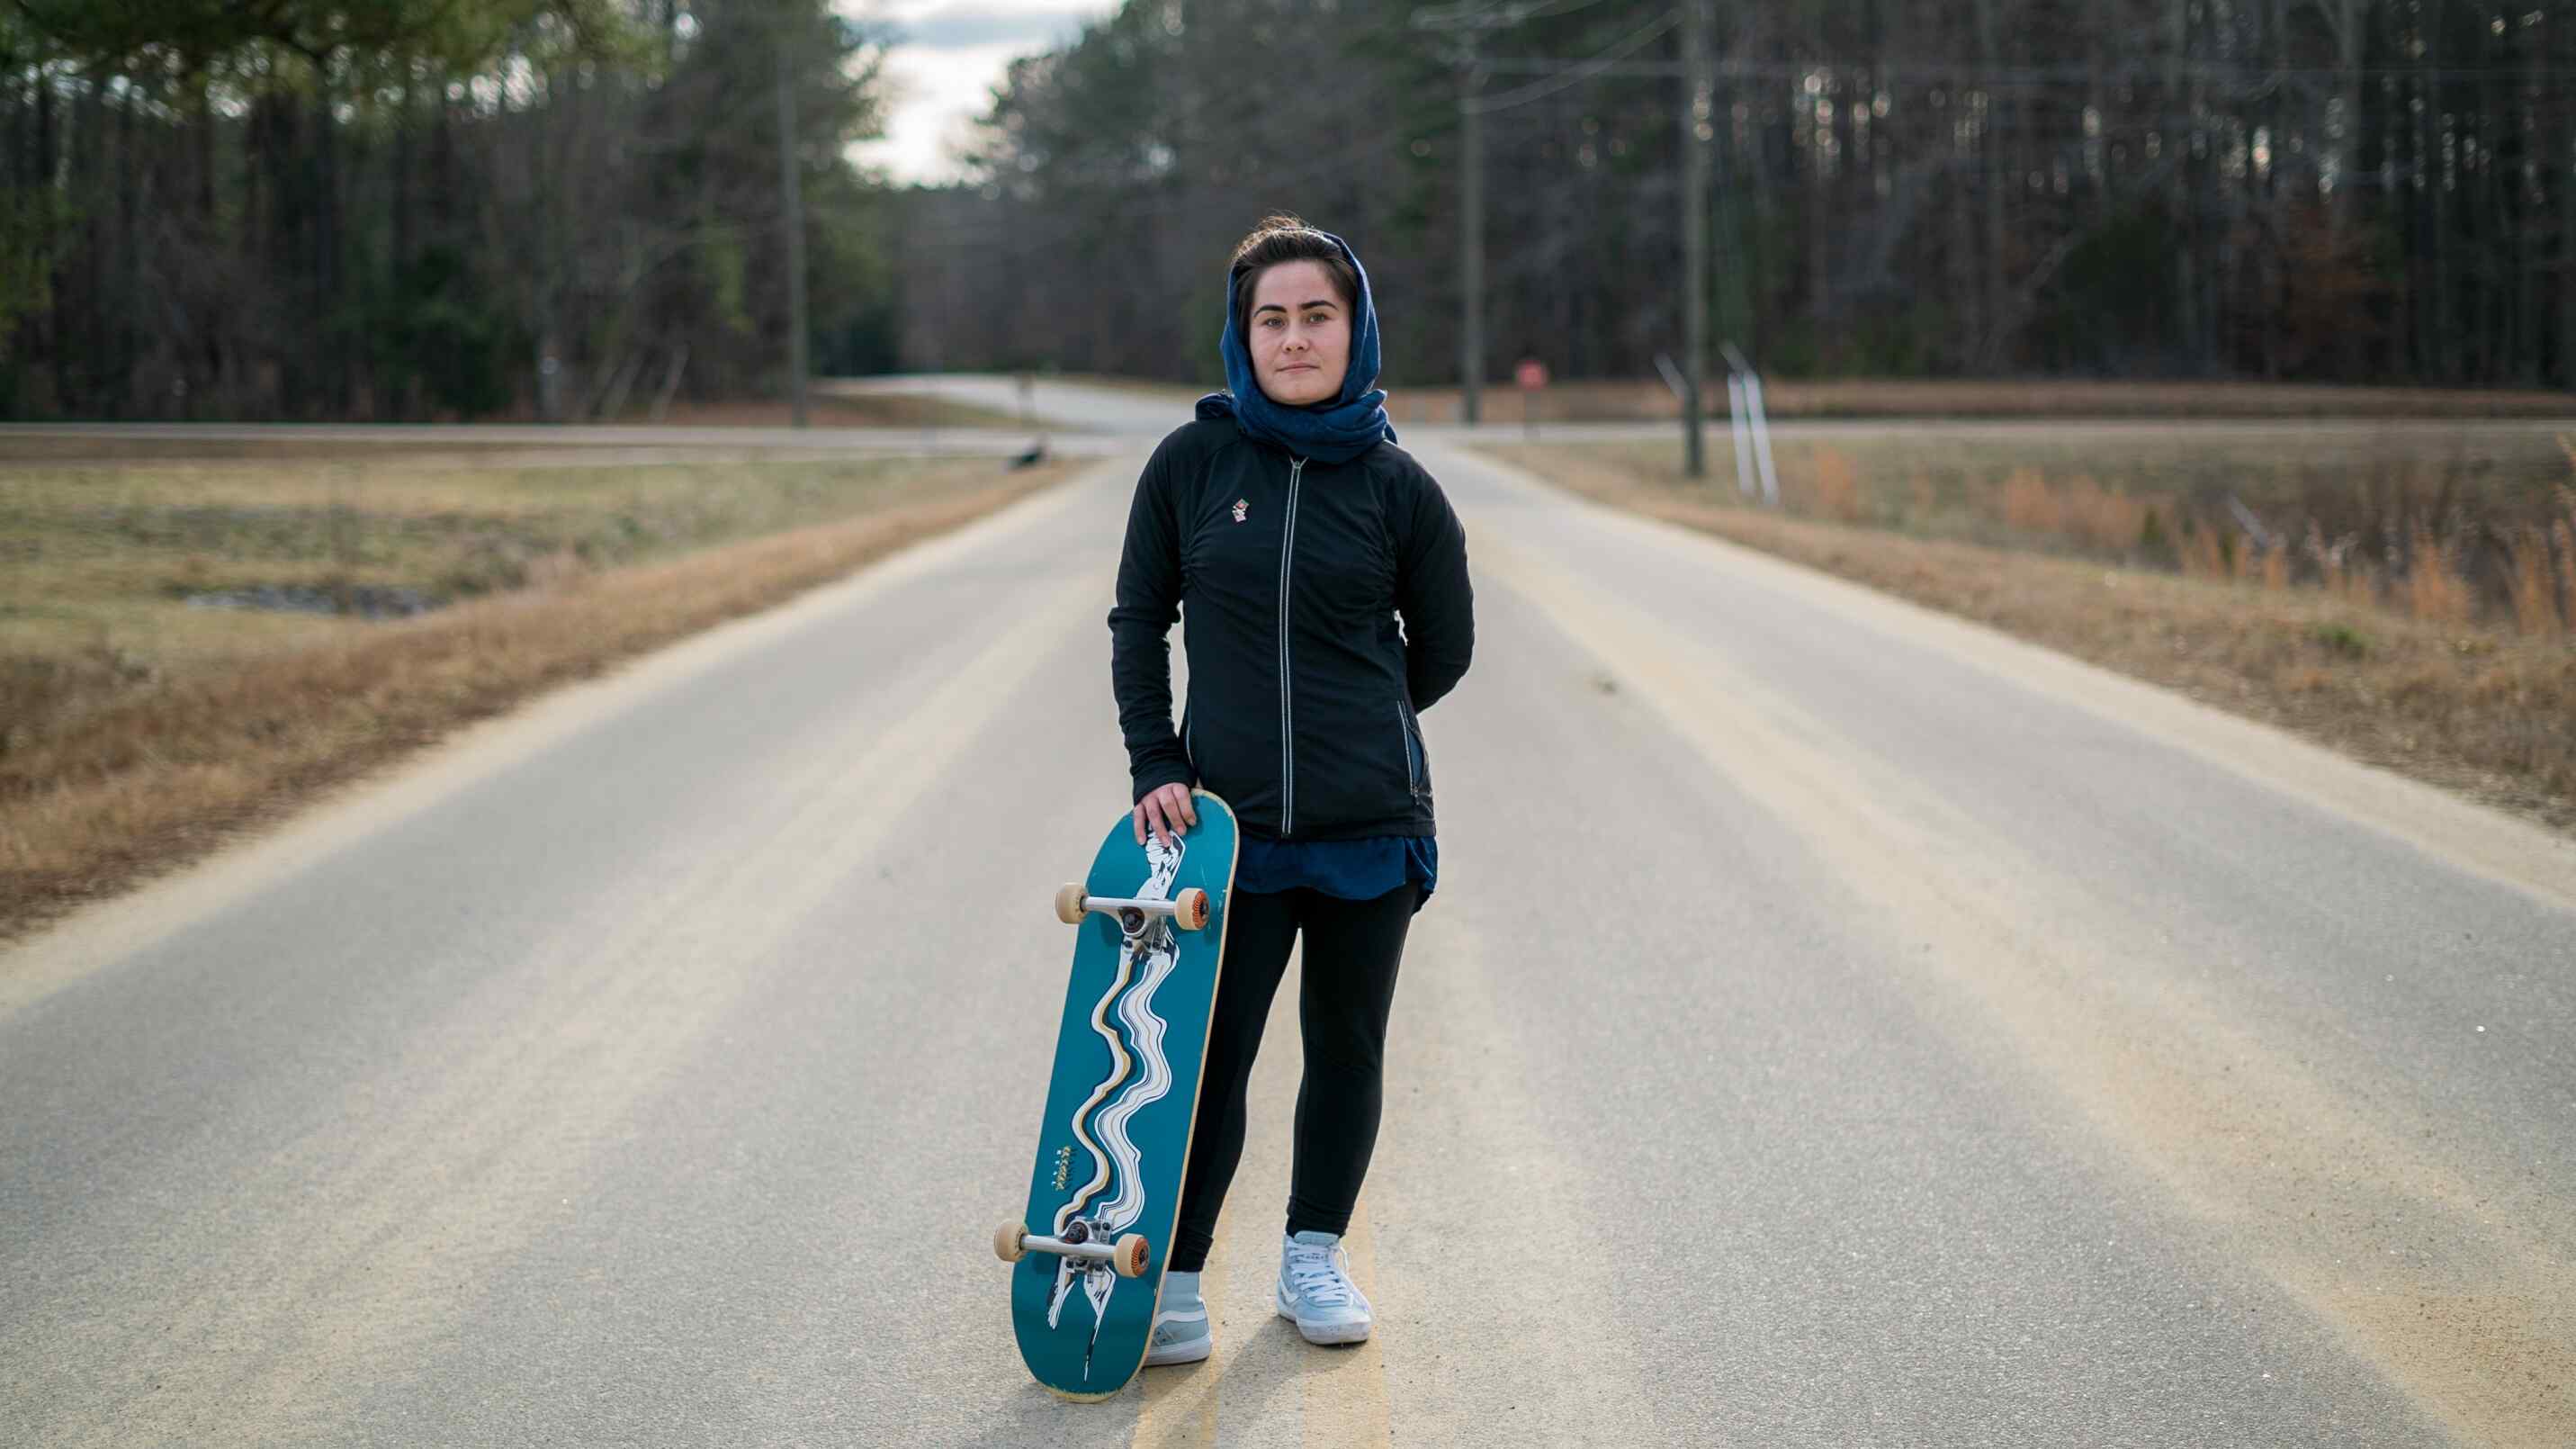 An Afghan refugee poses for a photo while holding her skateboard.